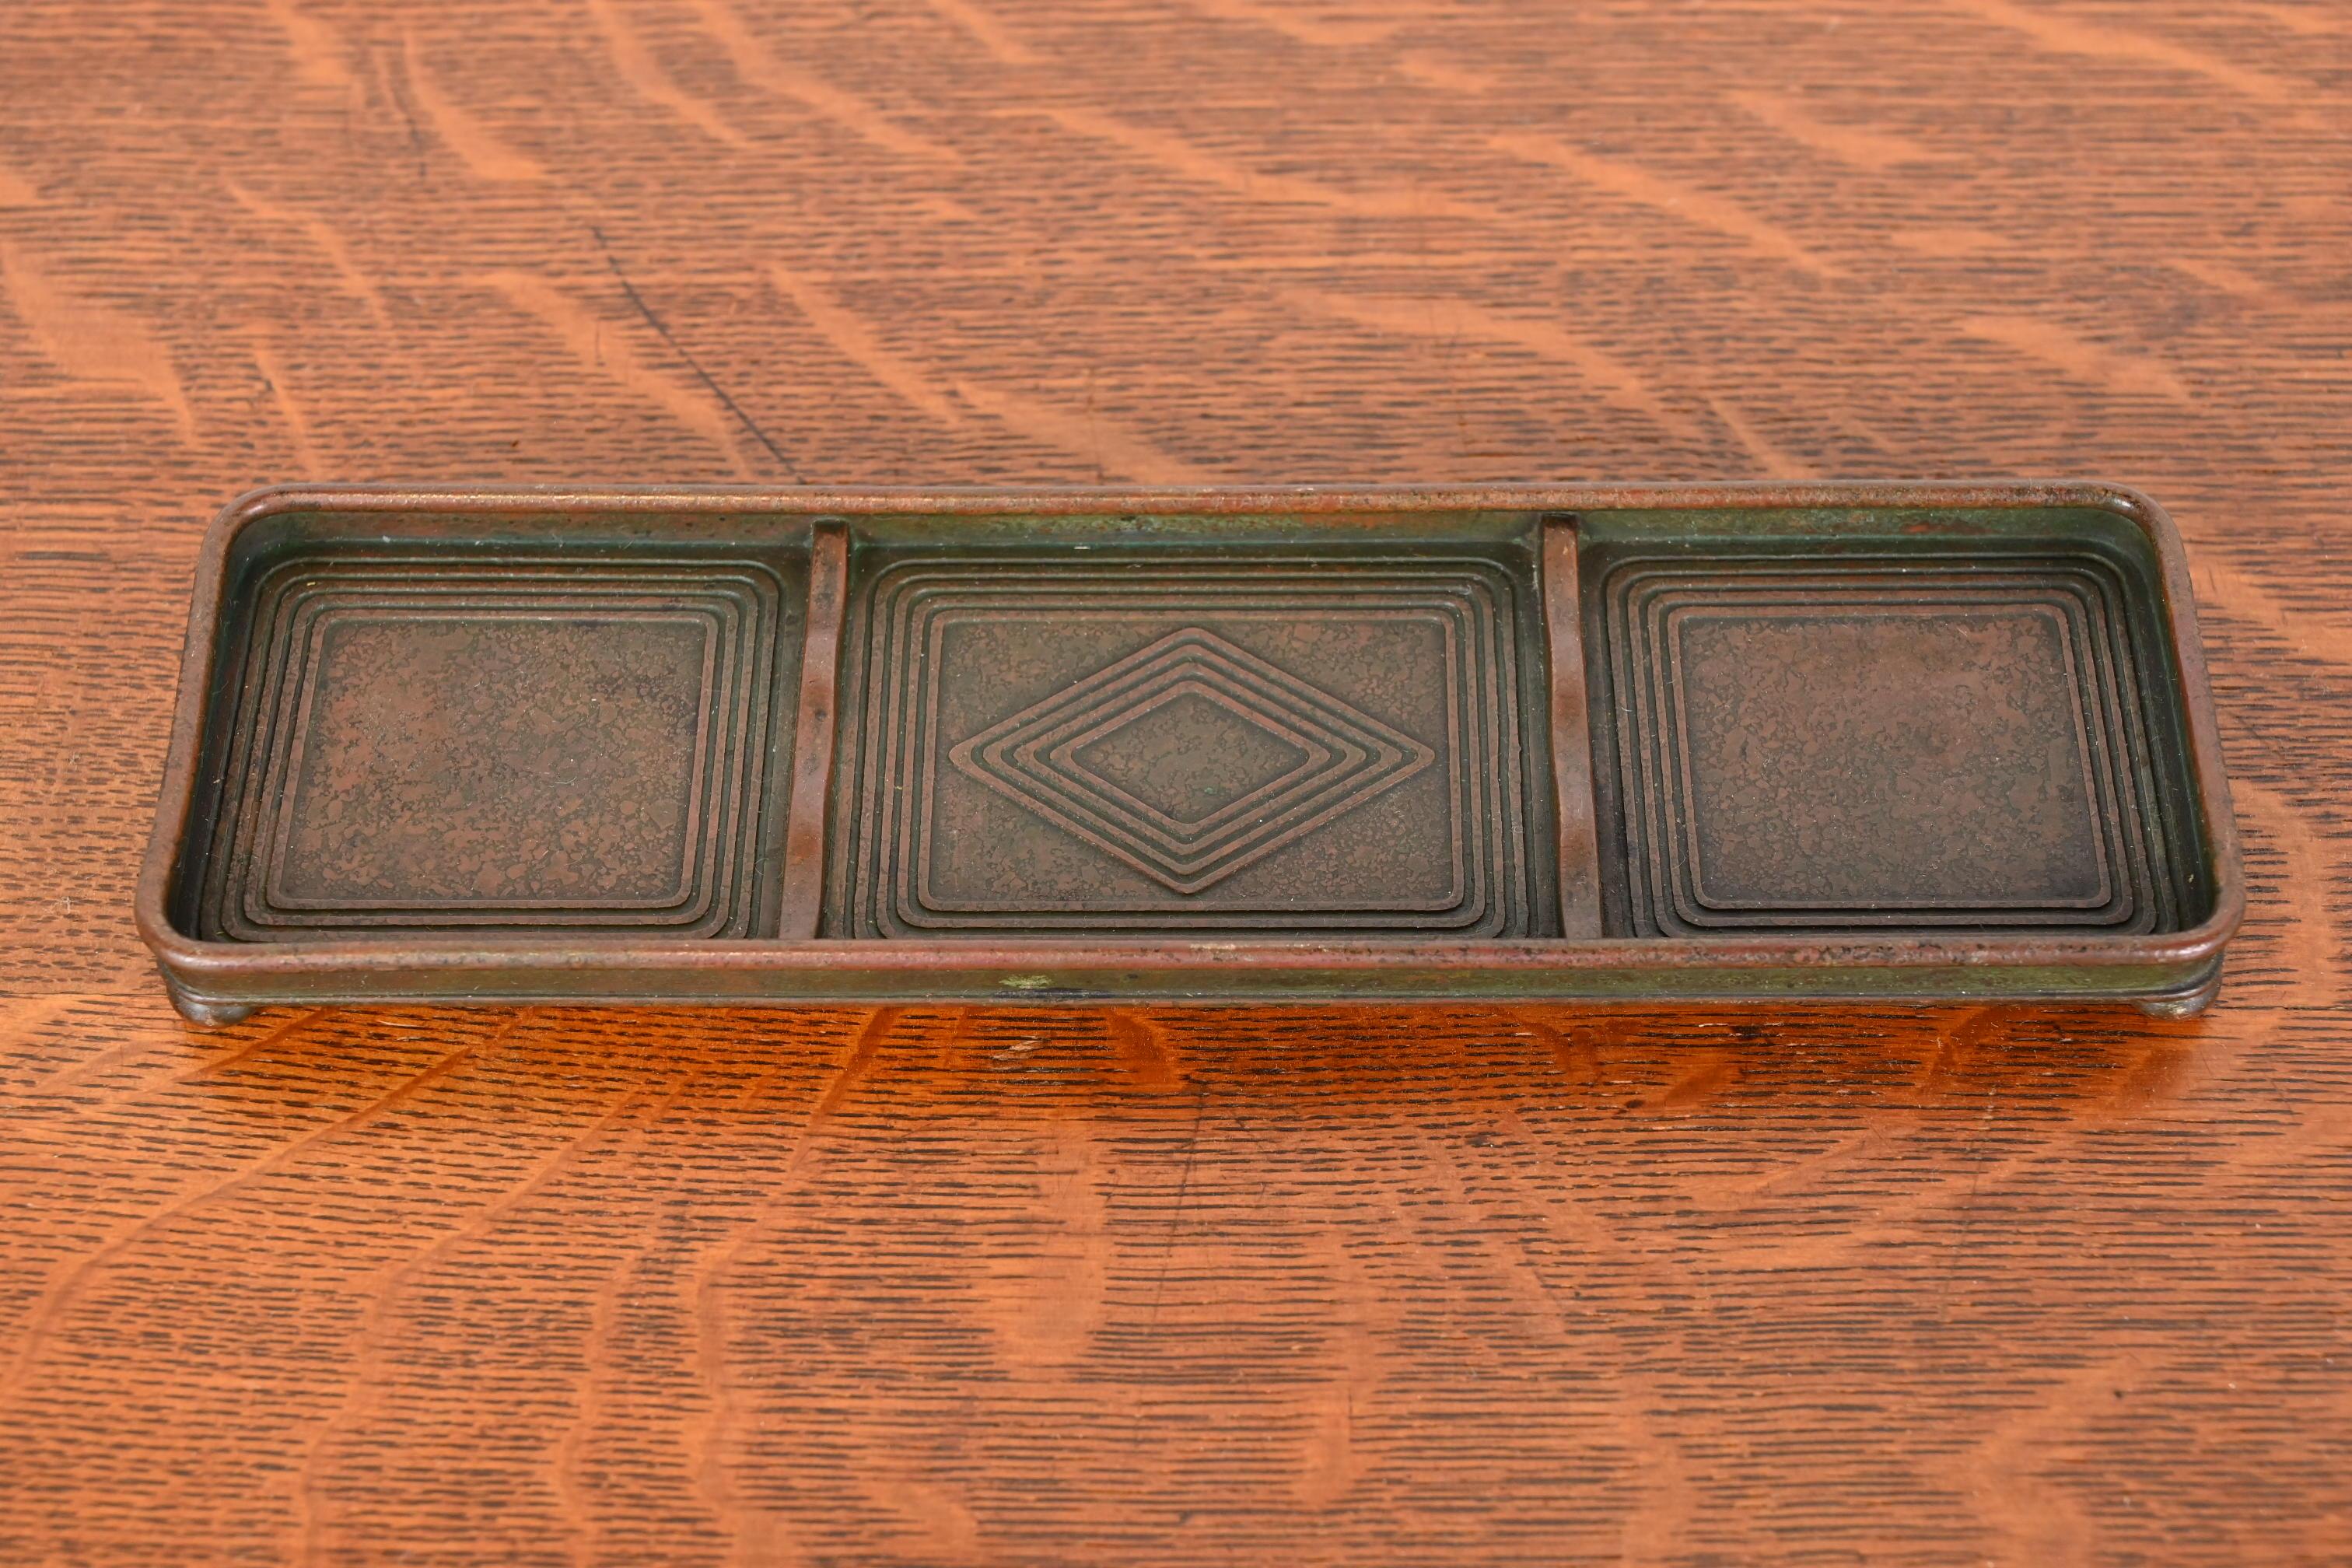 A gorgeous antique bronze Graduate pattern desk pen tray with verdigris green patina

By Tiffany Studios (signed to the underside)

New York, USA, Early 20th Century

Measures: 8.75